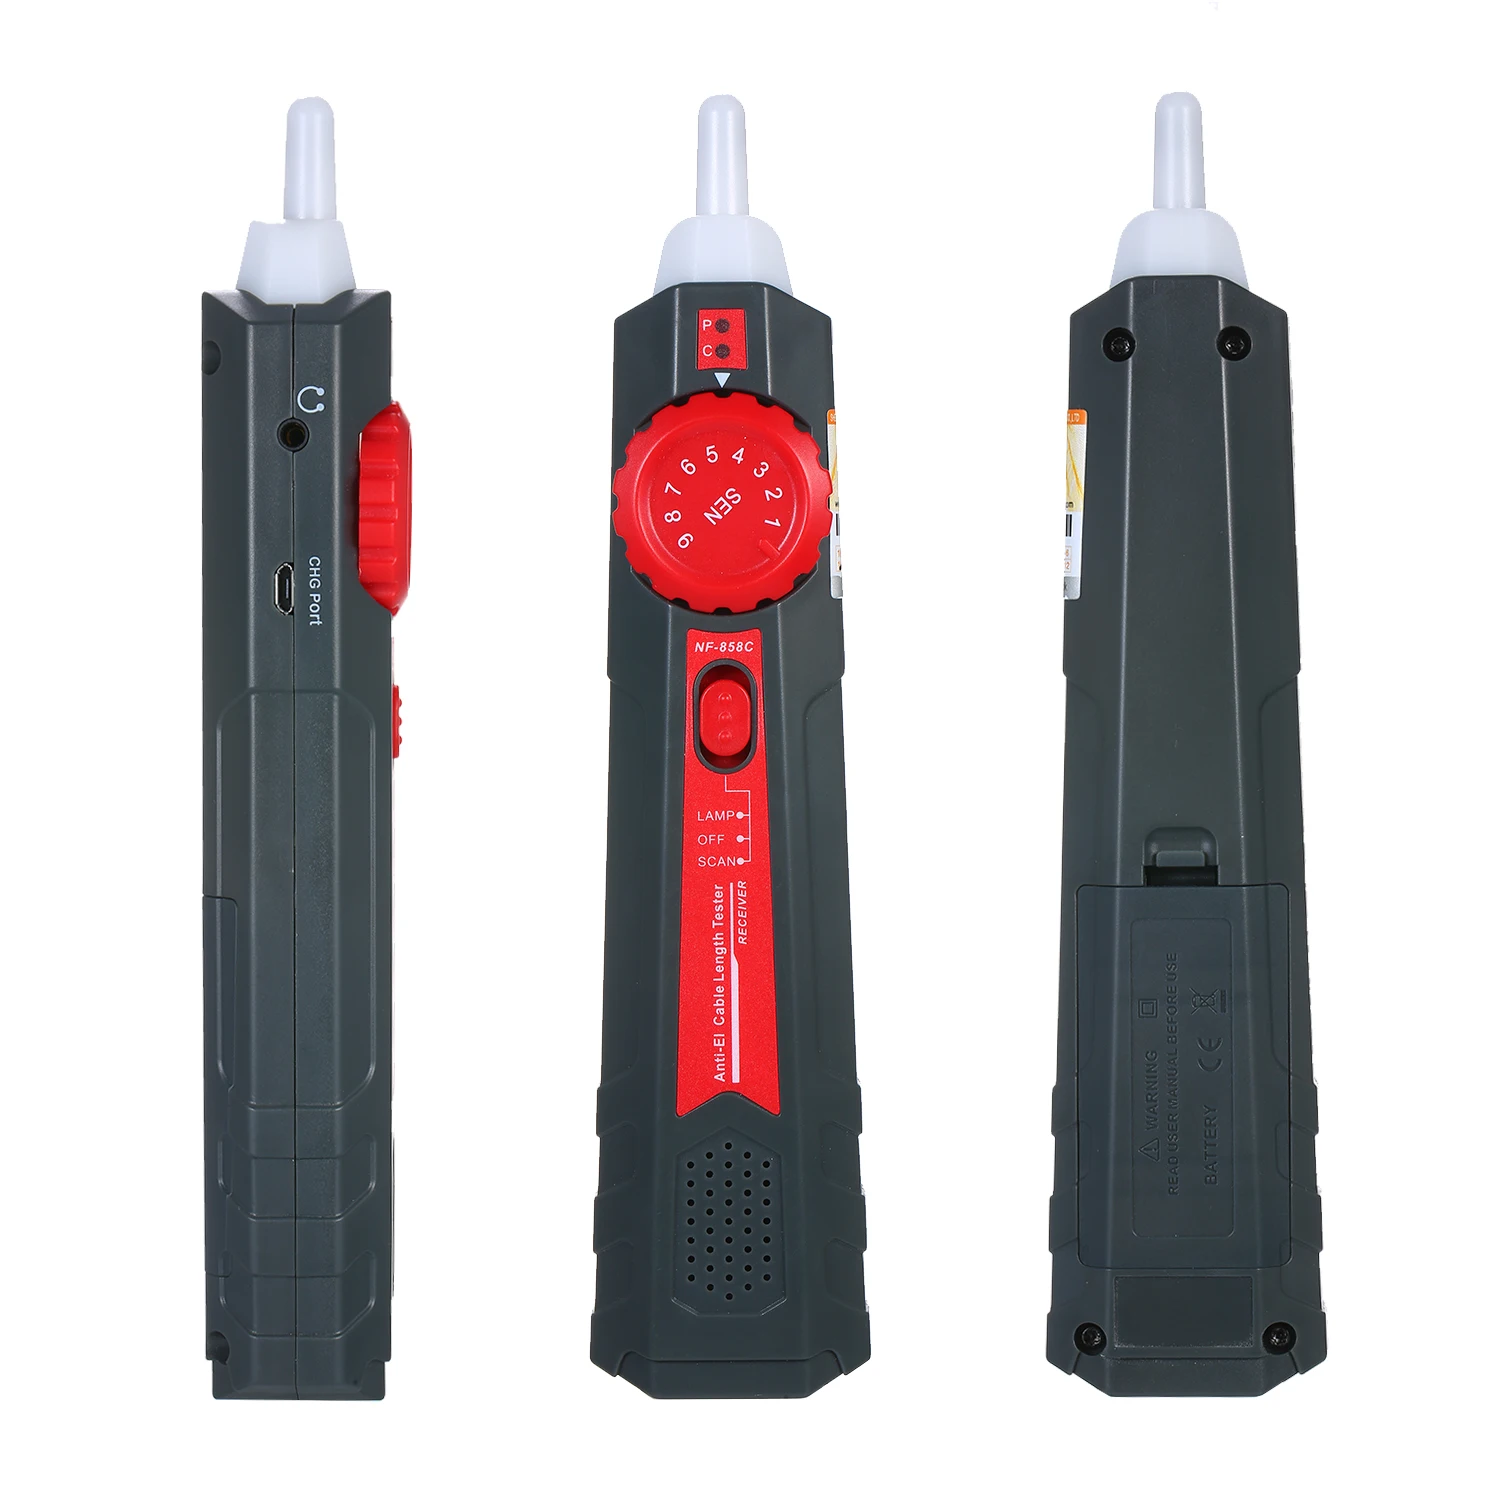 Wire Tracker Electrical Line Finding Testing Cable Tester Handheld Line Finder Cable Detector Wire Measuring Instrument